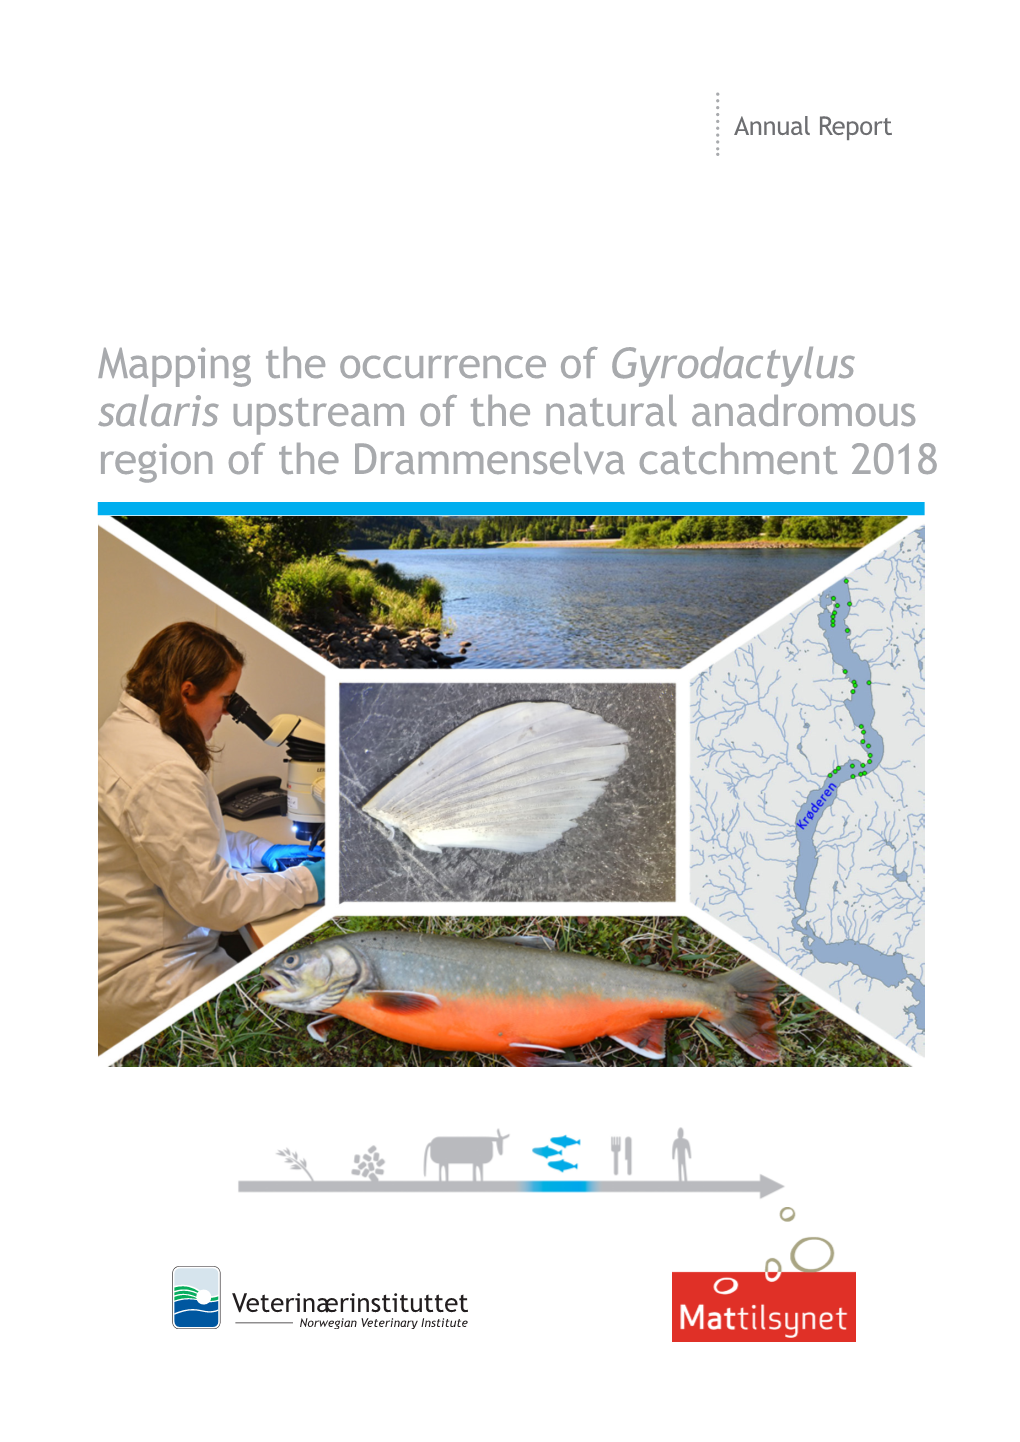 Mapping the Occurrence of Gyrodactylus Salaris Upstream of the Natural Anadromous Region of the Drammenselva Catchment 2018 NORWEGIAN VETERINARY INSTITUTE